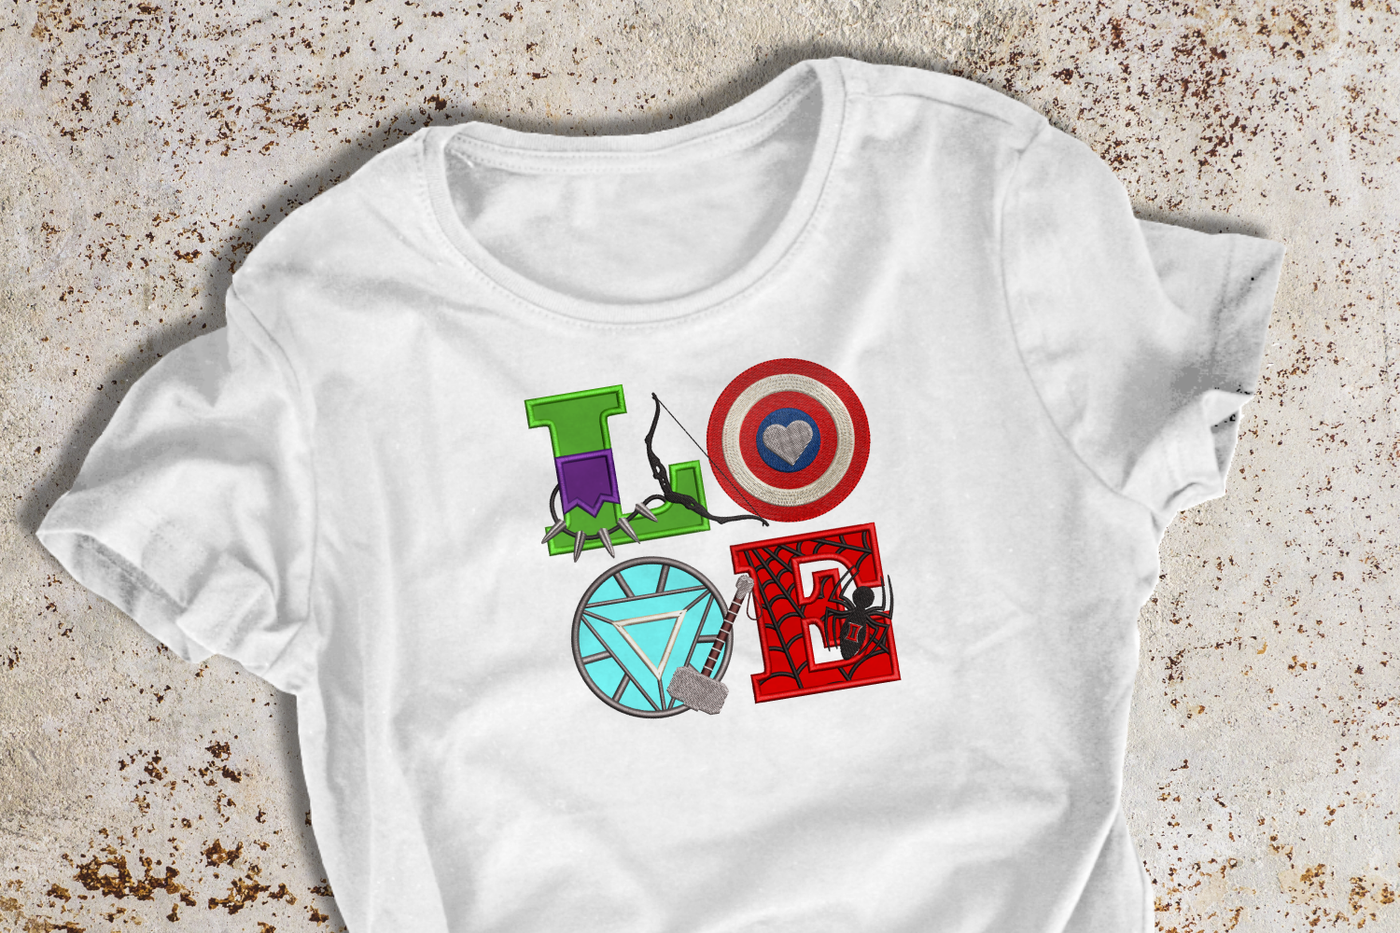 Shirt with an applique design that says "LOVE" set on a square. The LOVE is spelled out with various comic symbols.